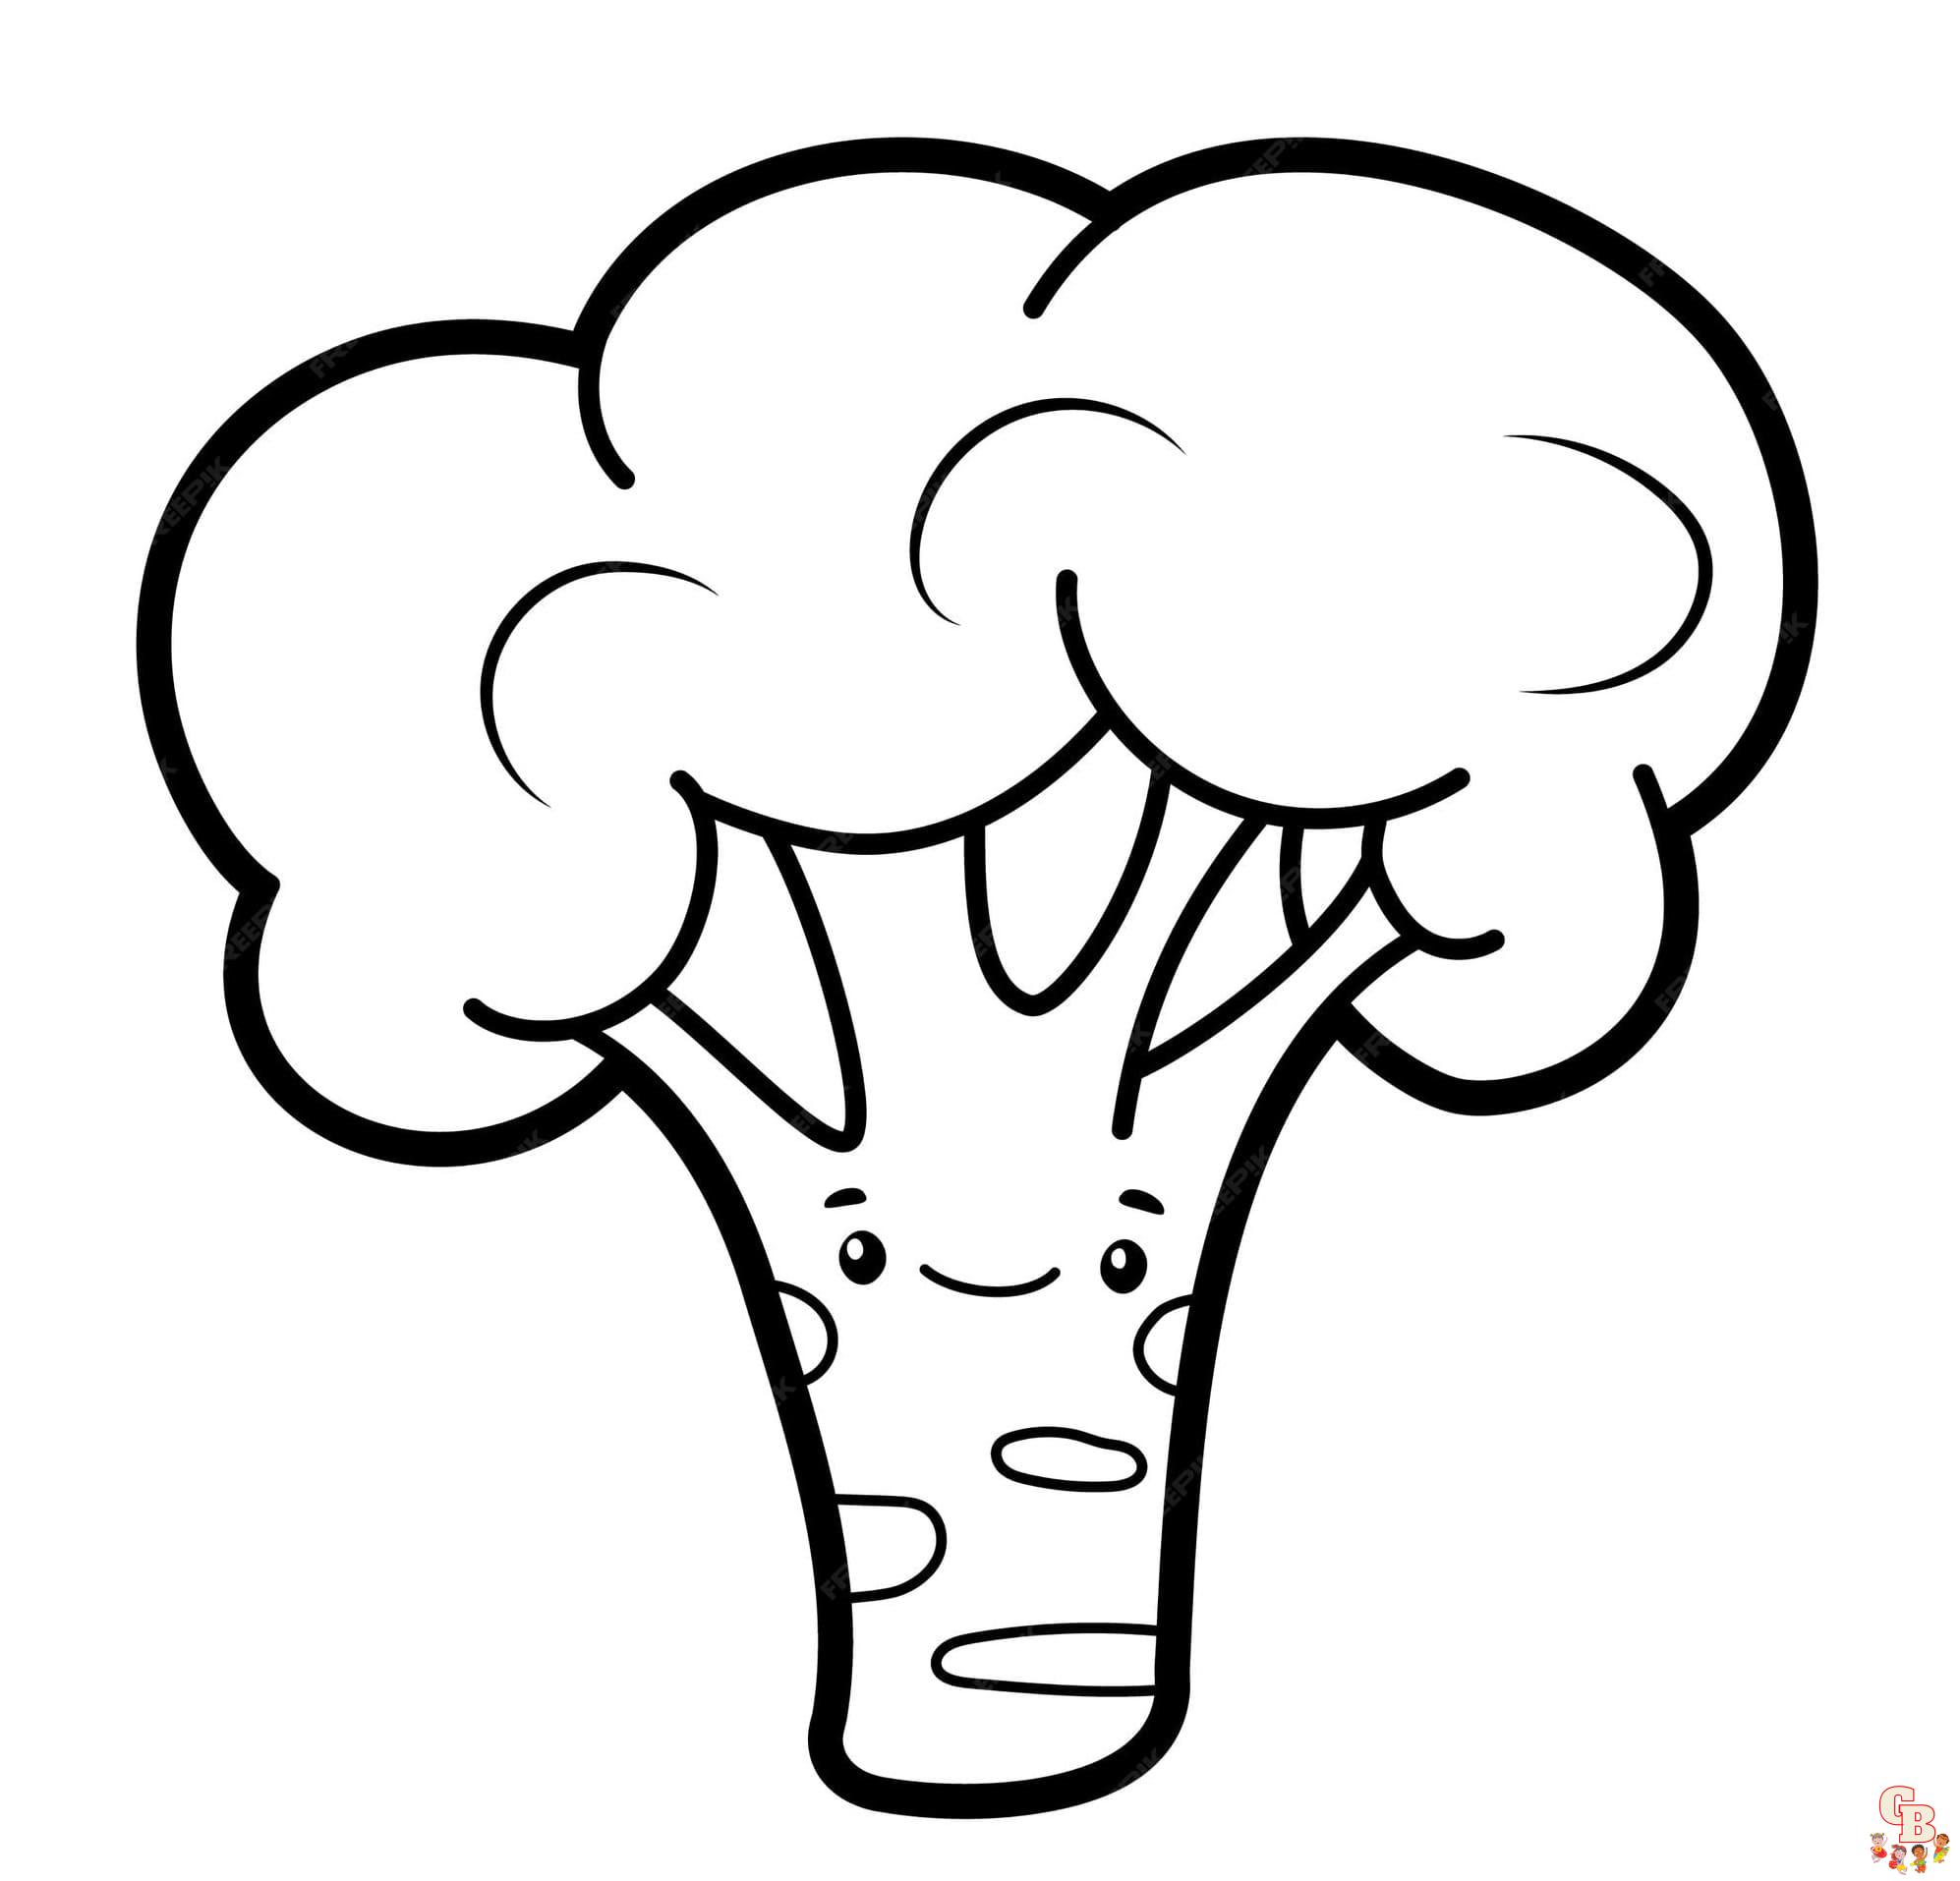 Broccoli coloring pages printable